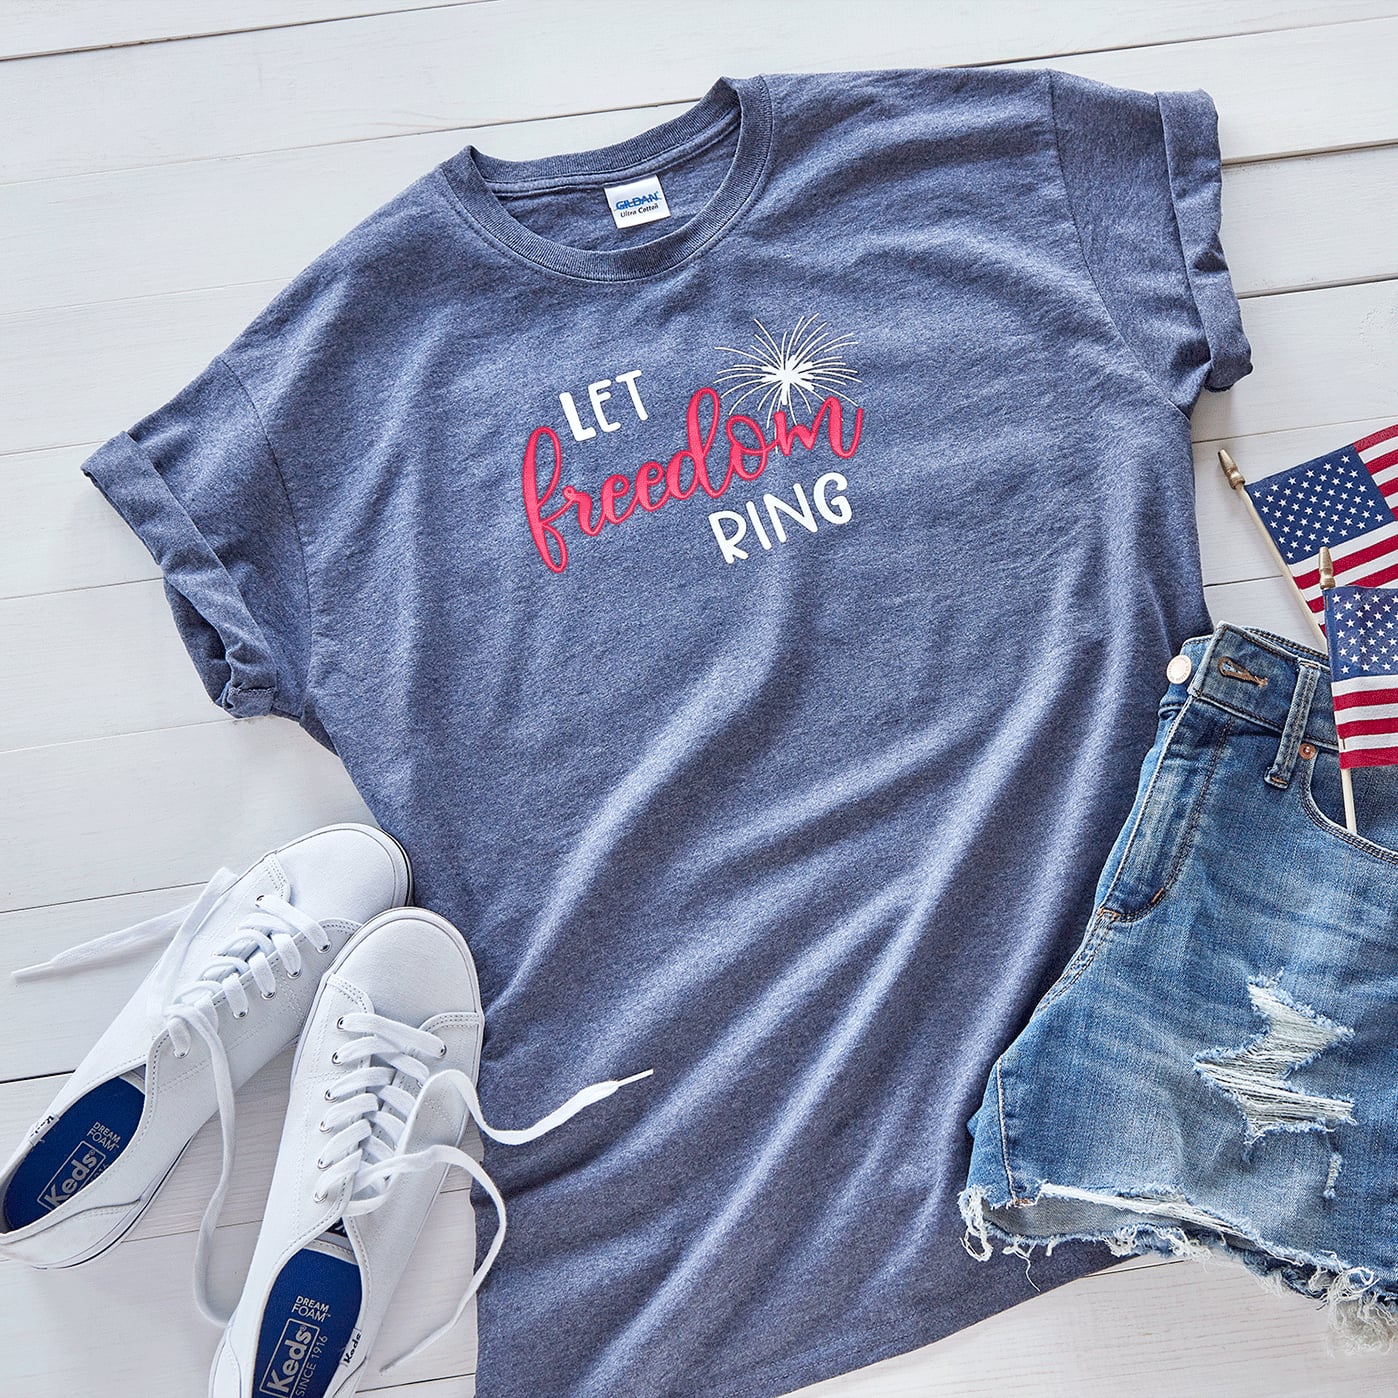 Let Freedom Ring T-Shirt